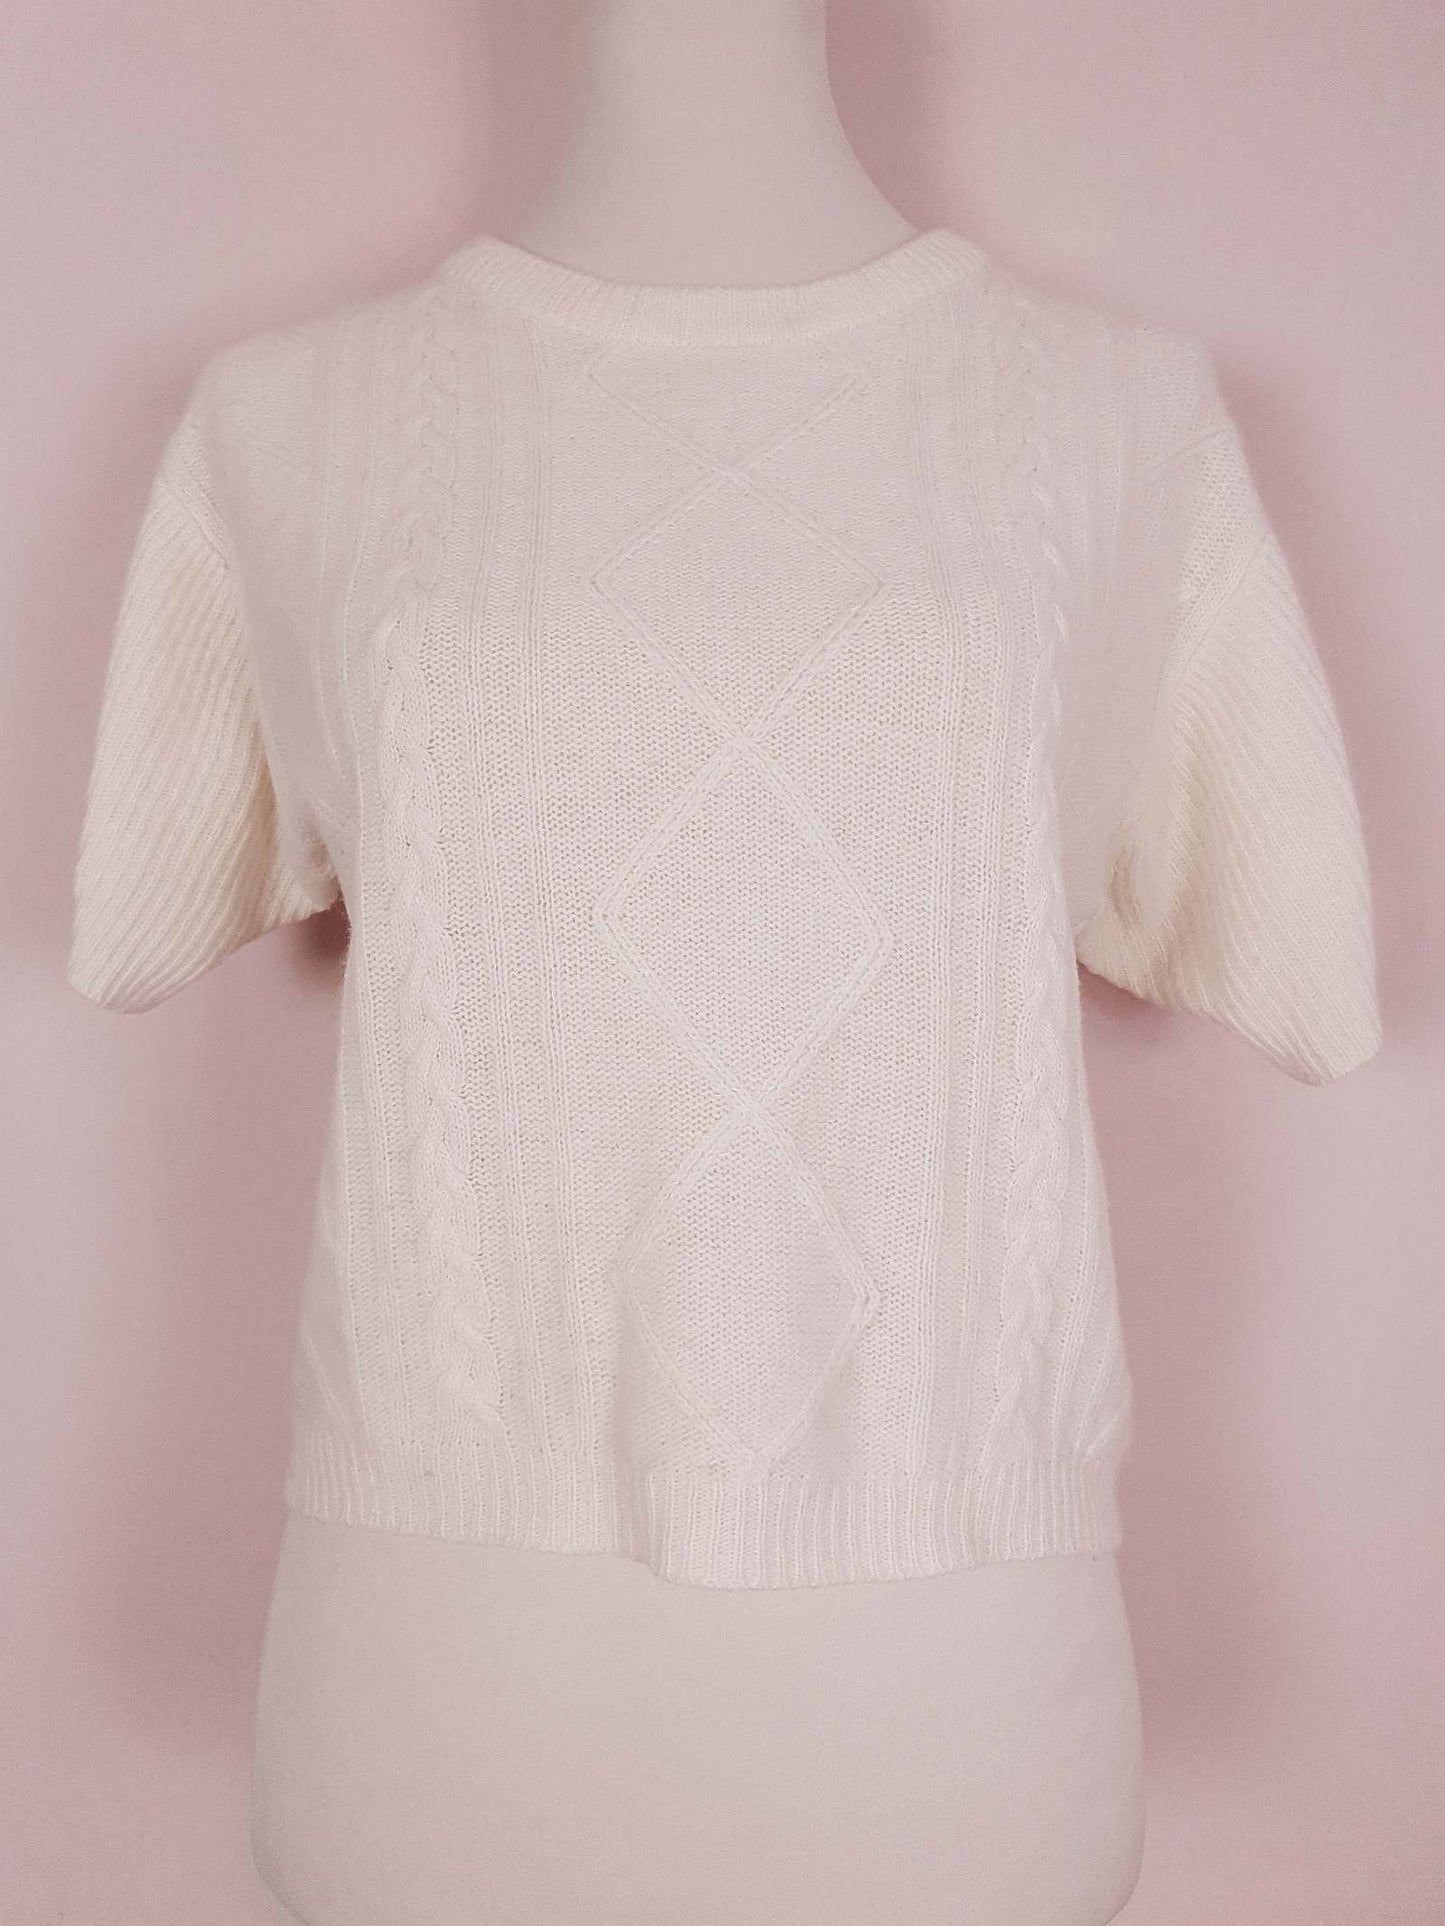 Vintage Cream Lambswool Angora Jumper Pullover Knit Top Size 10/12